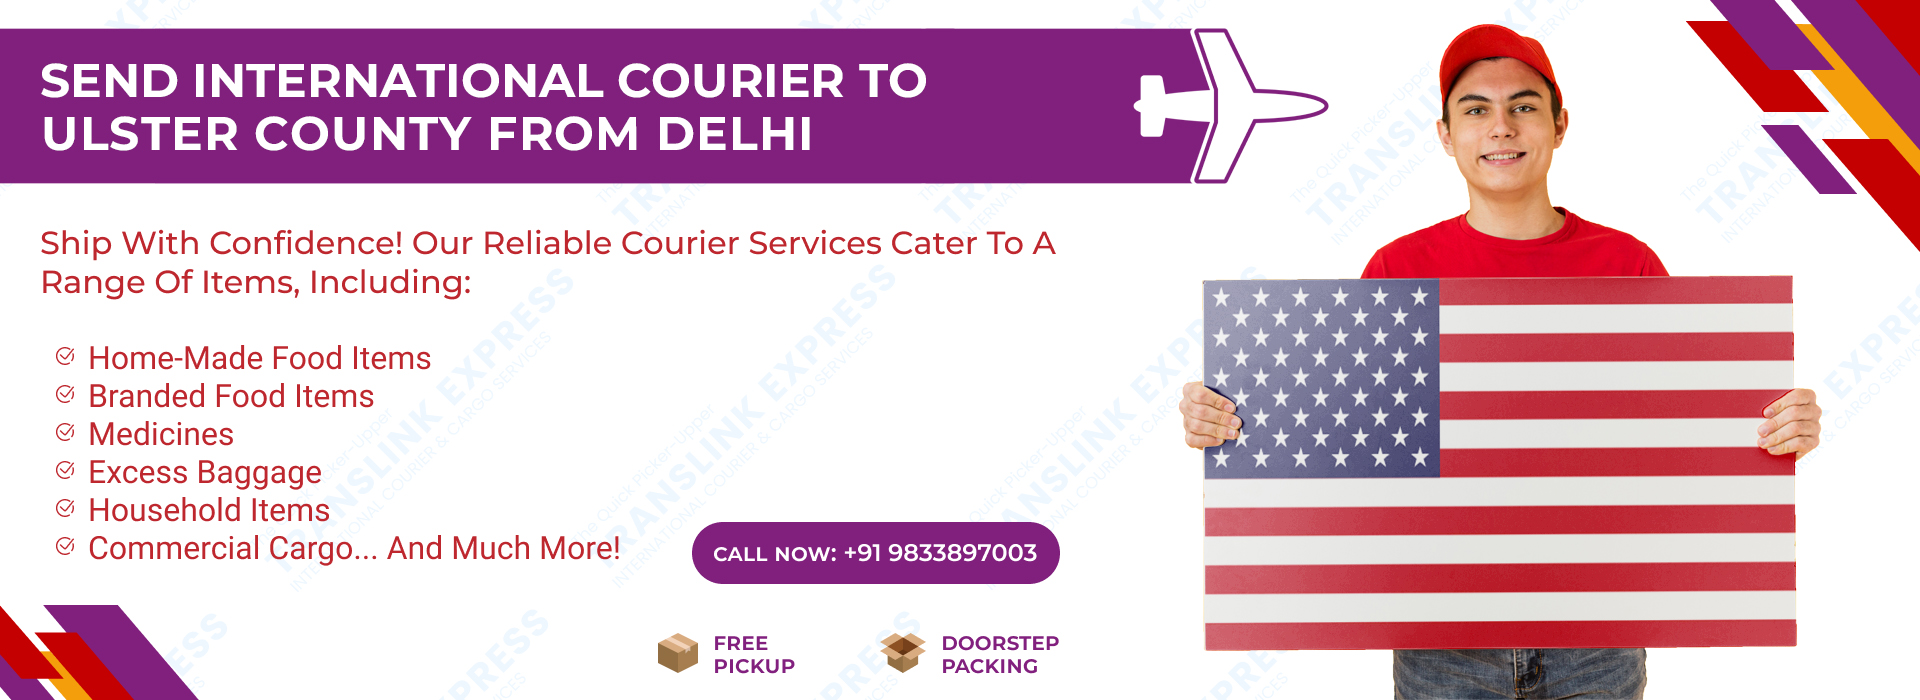 Courier to Ulster County From Delhi